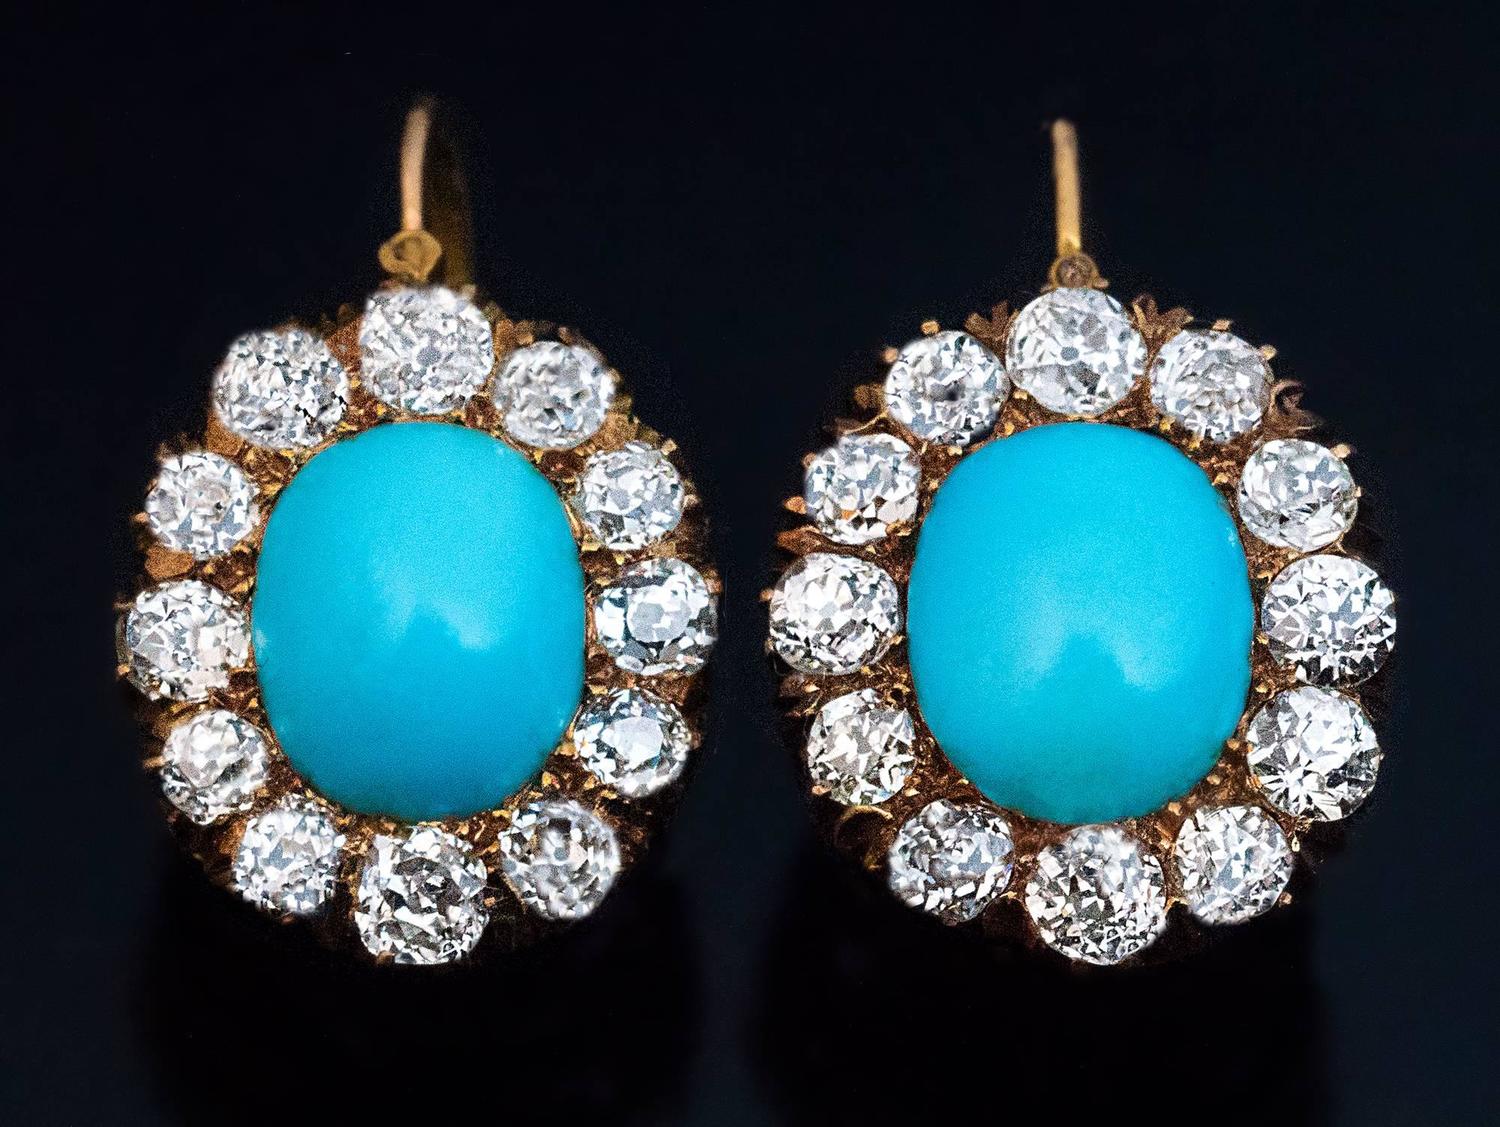 Antique Turquoise Diamond Gold Earrings At Stdibs